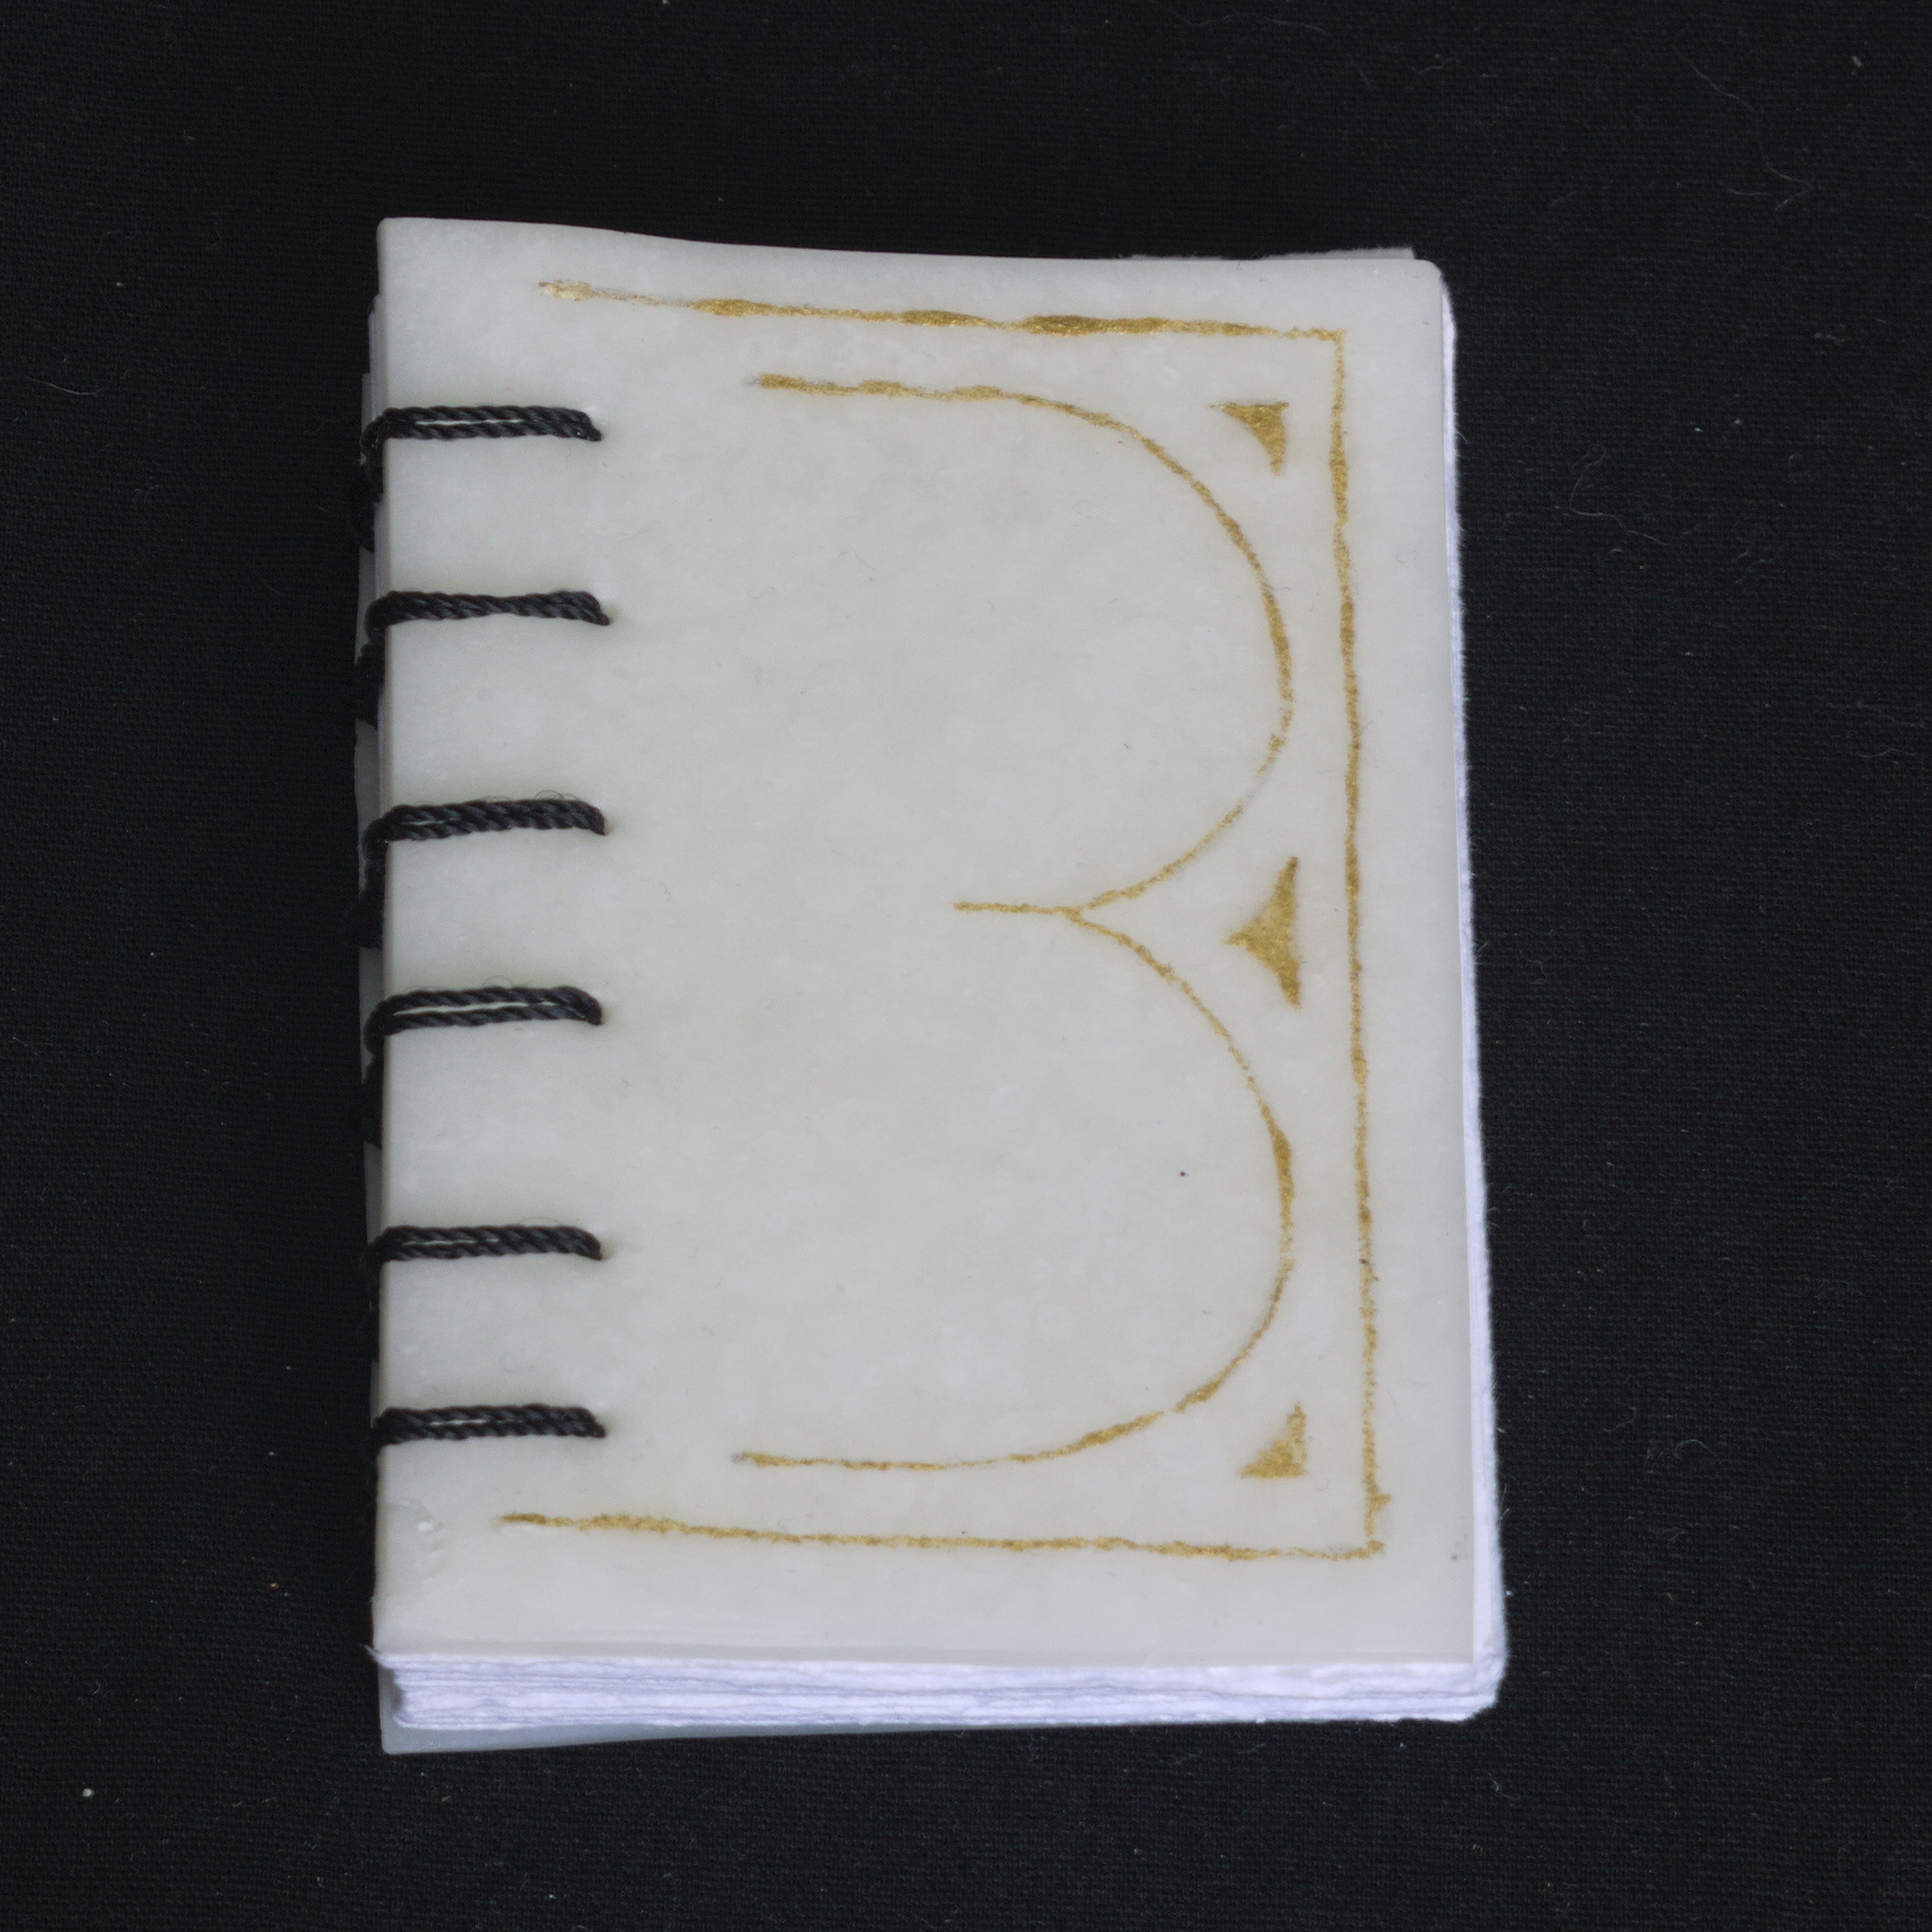 A coptic bound small book, seen from the front. The cover is
made of white cernit, with thin lines painted in gold acrylic to
form a sort of B shape.